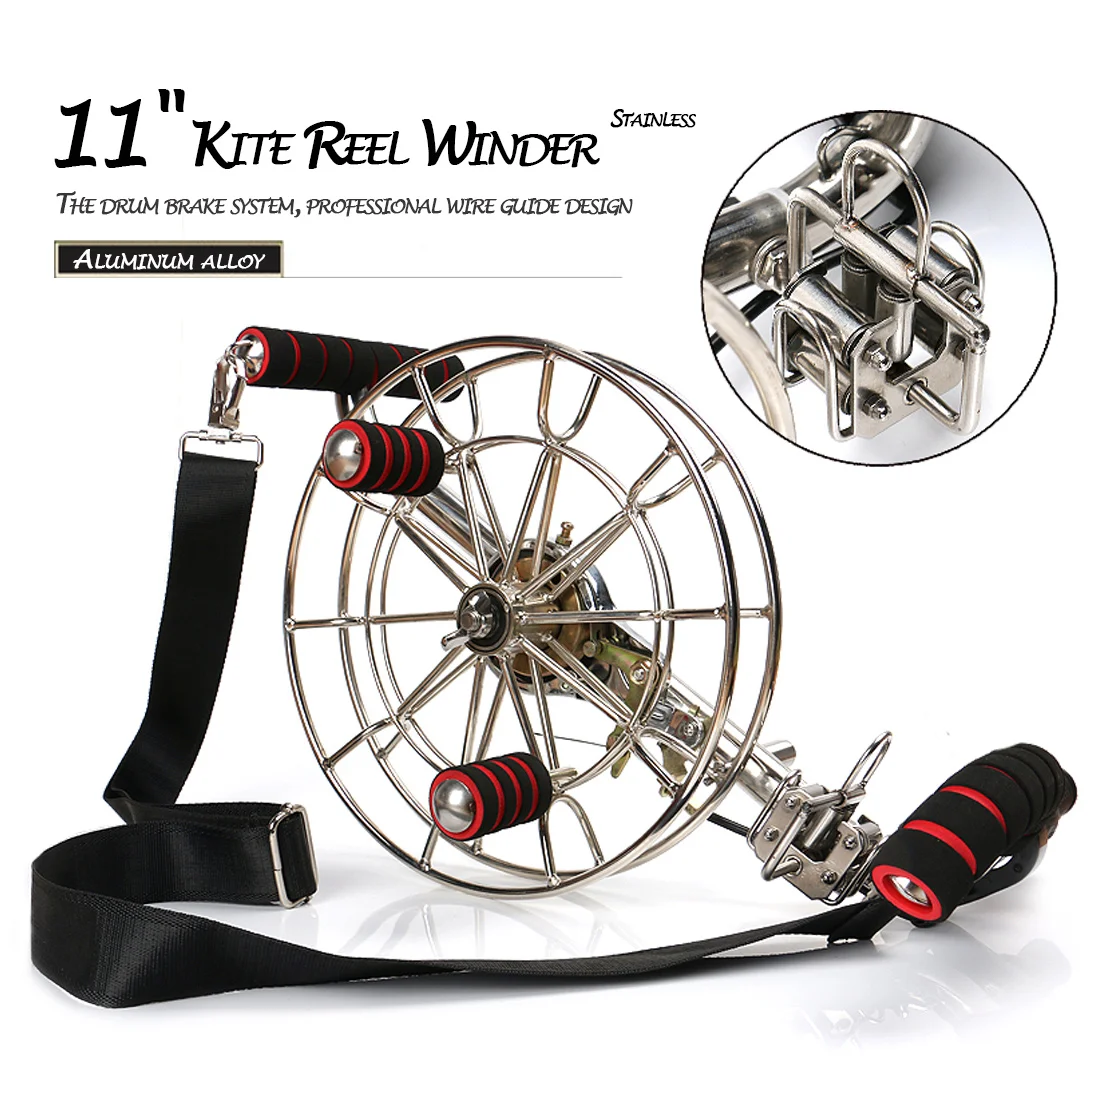 PROFESSIONAL 11" Strong Stainless Kite Line Winder Reel Brakes Control Adult Men 